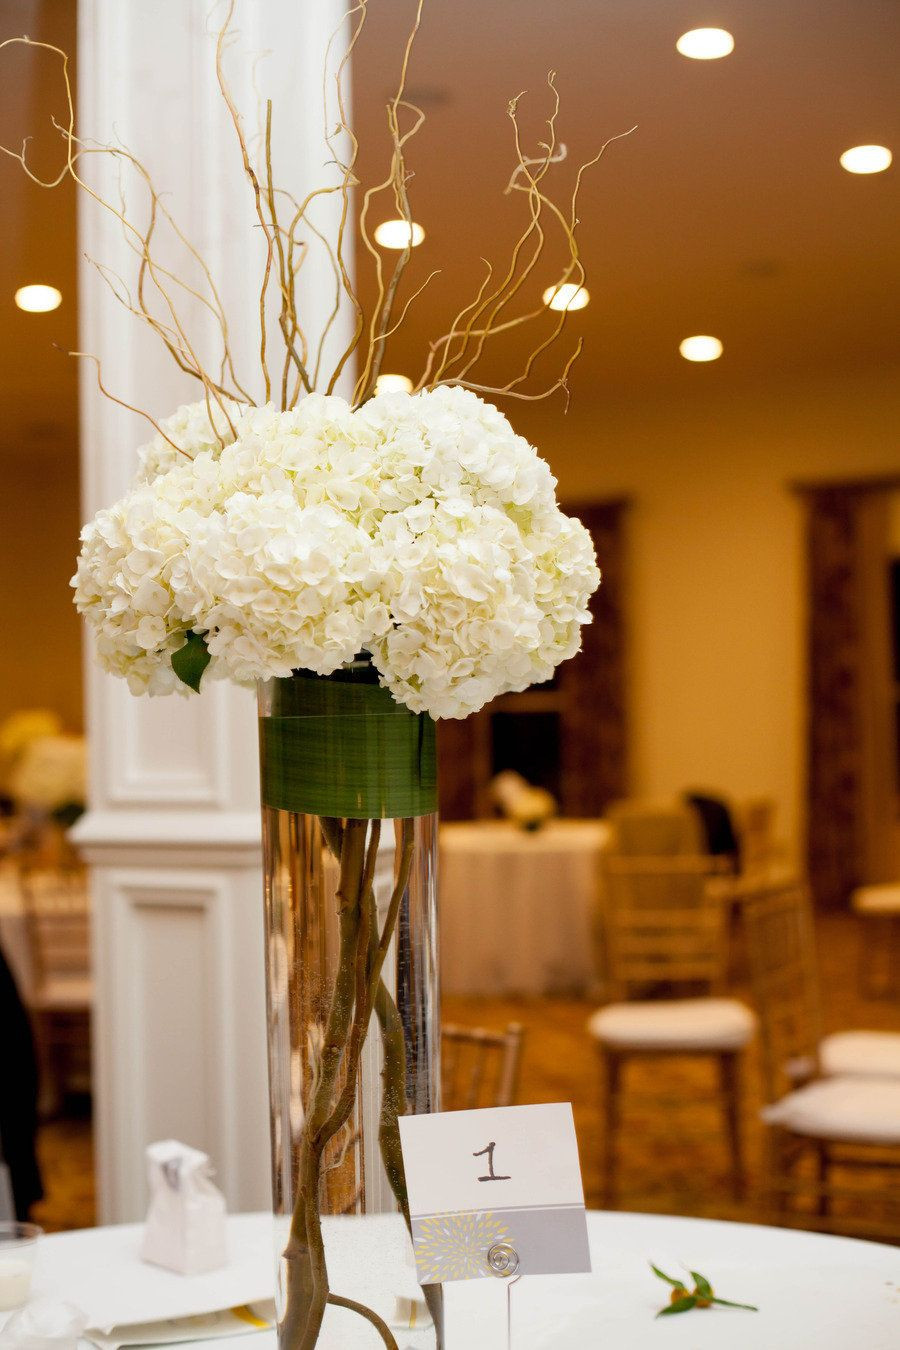 29 Best Tall Trumpet Wedding Vases 2024 free download tall trumpet wedding vases of projects idea of tall vase centerpiece super site intended for charming inspiration tall vase centerpiece greenville wedding at honey lake plantation from tonya